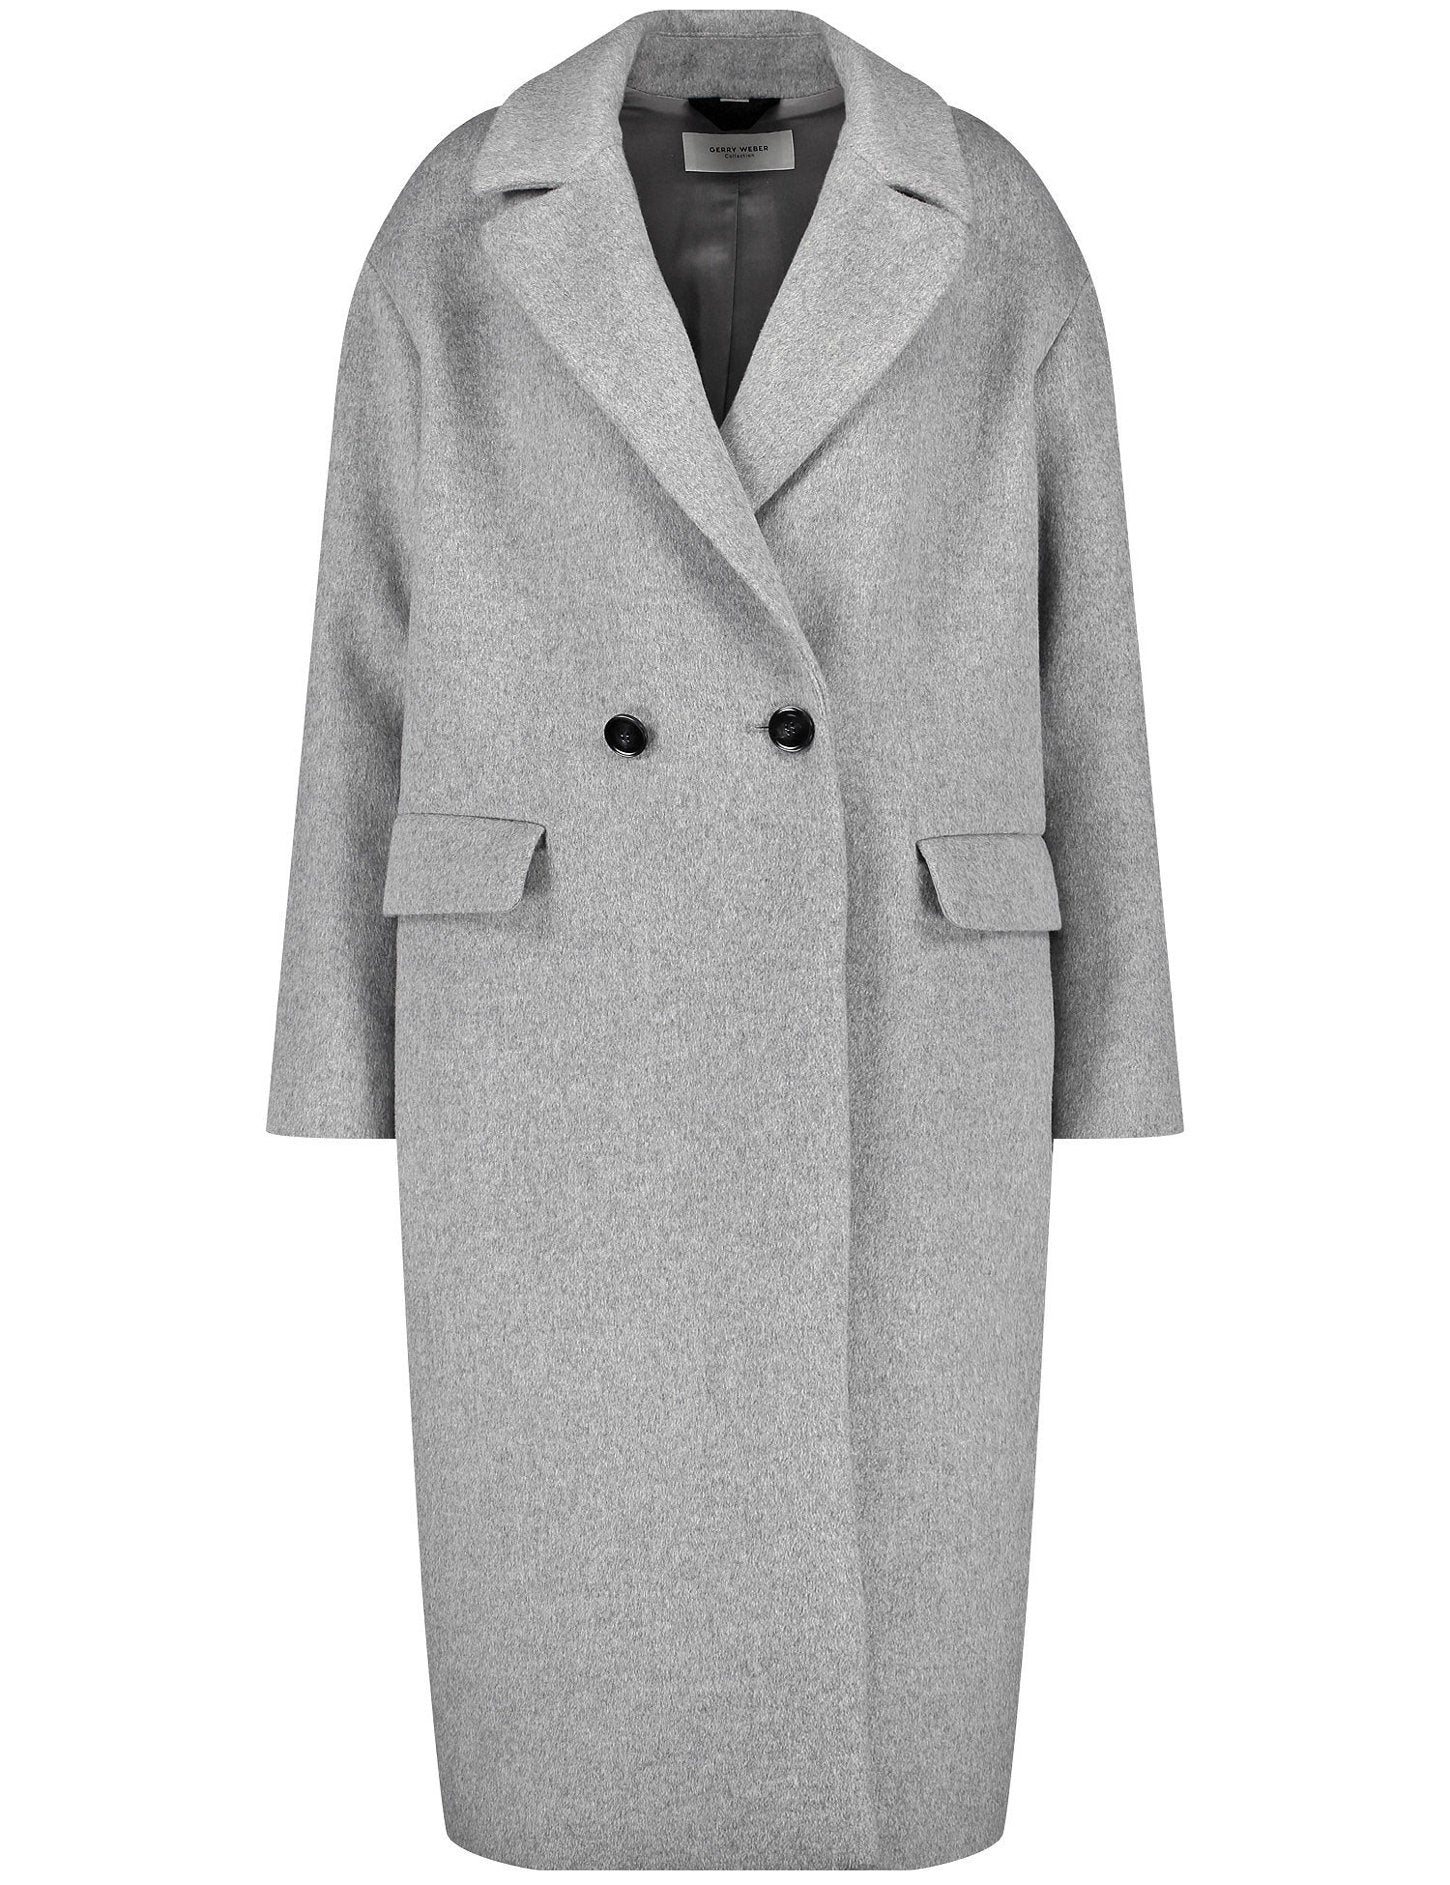 Coat In A Slightly Oversized Cut With Wool_250014-31135_20348_02